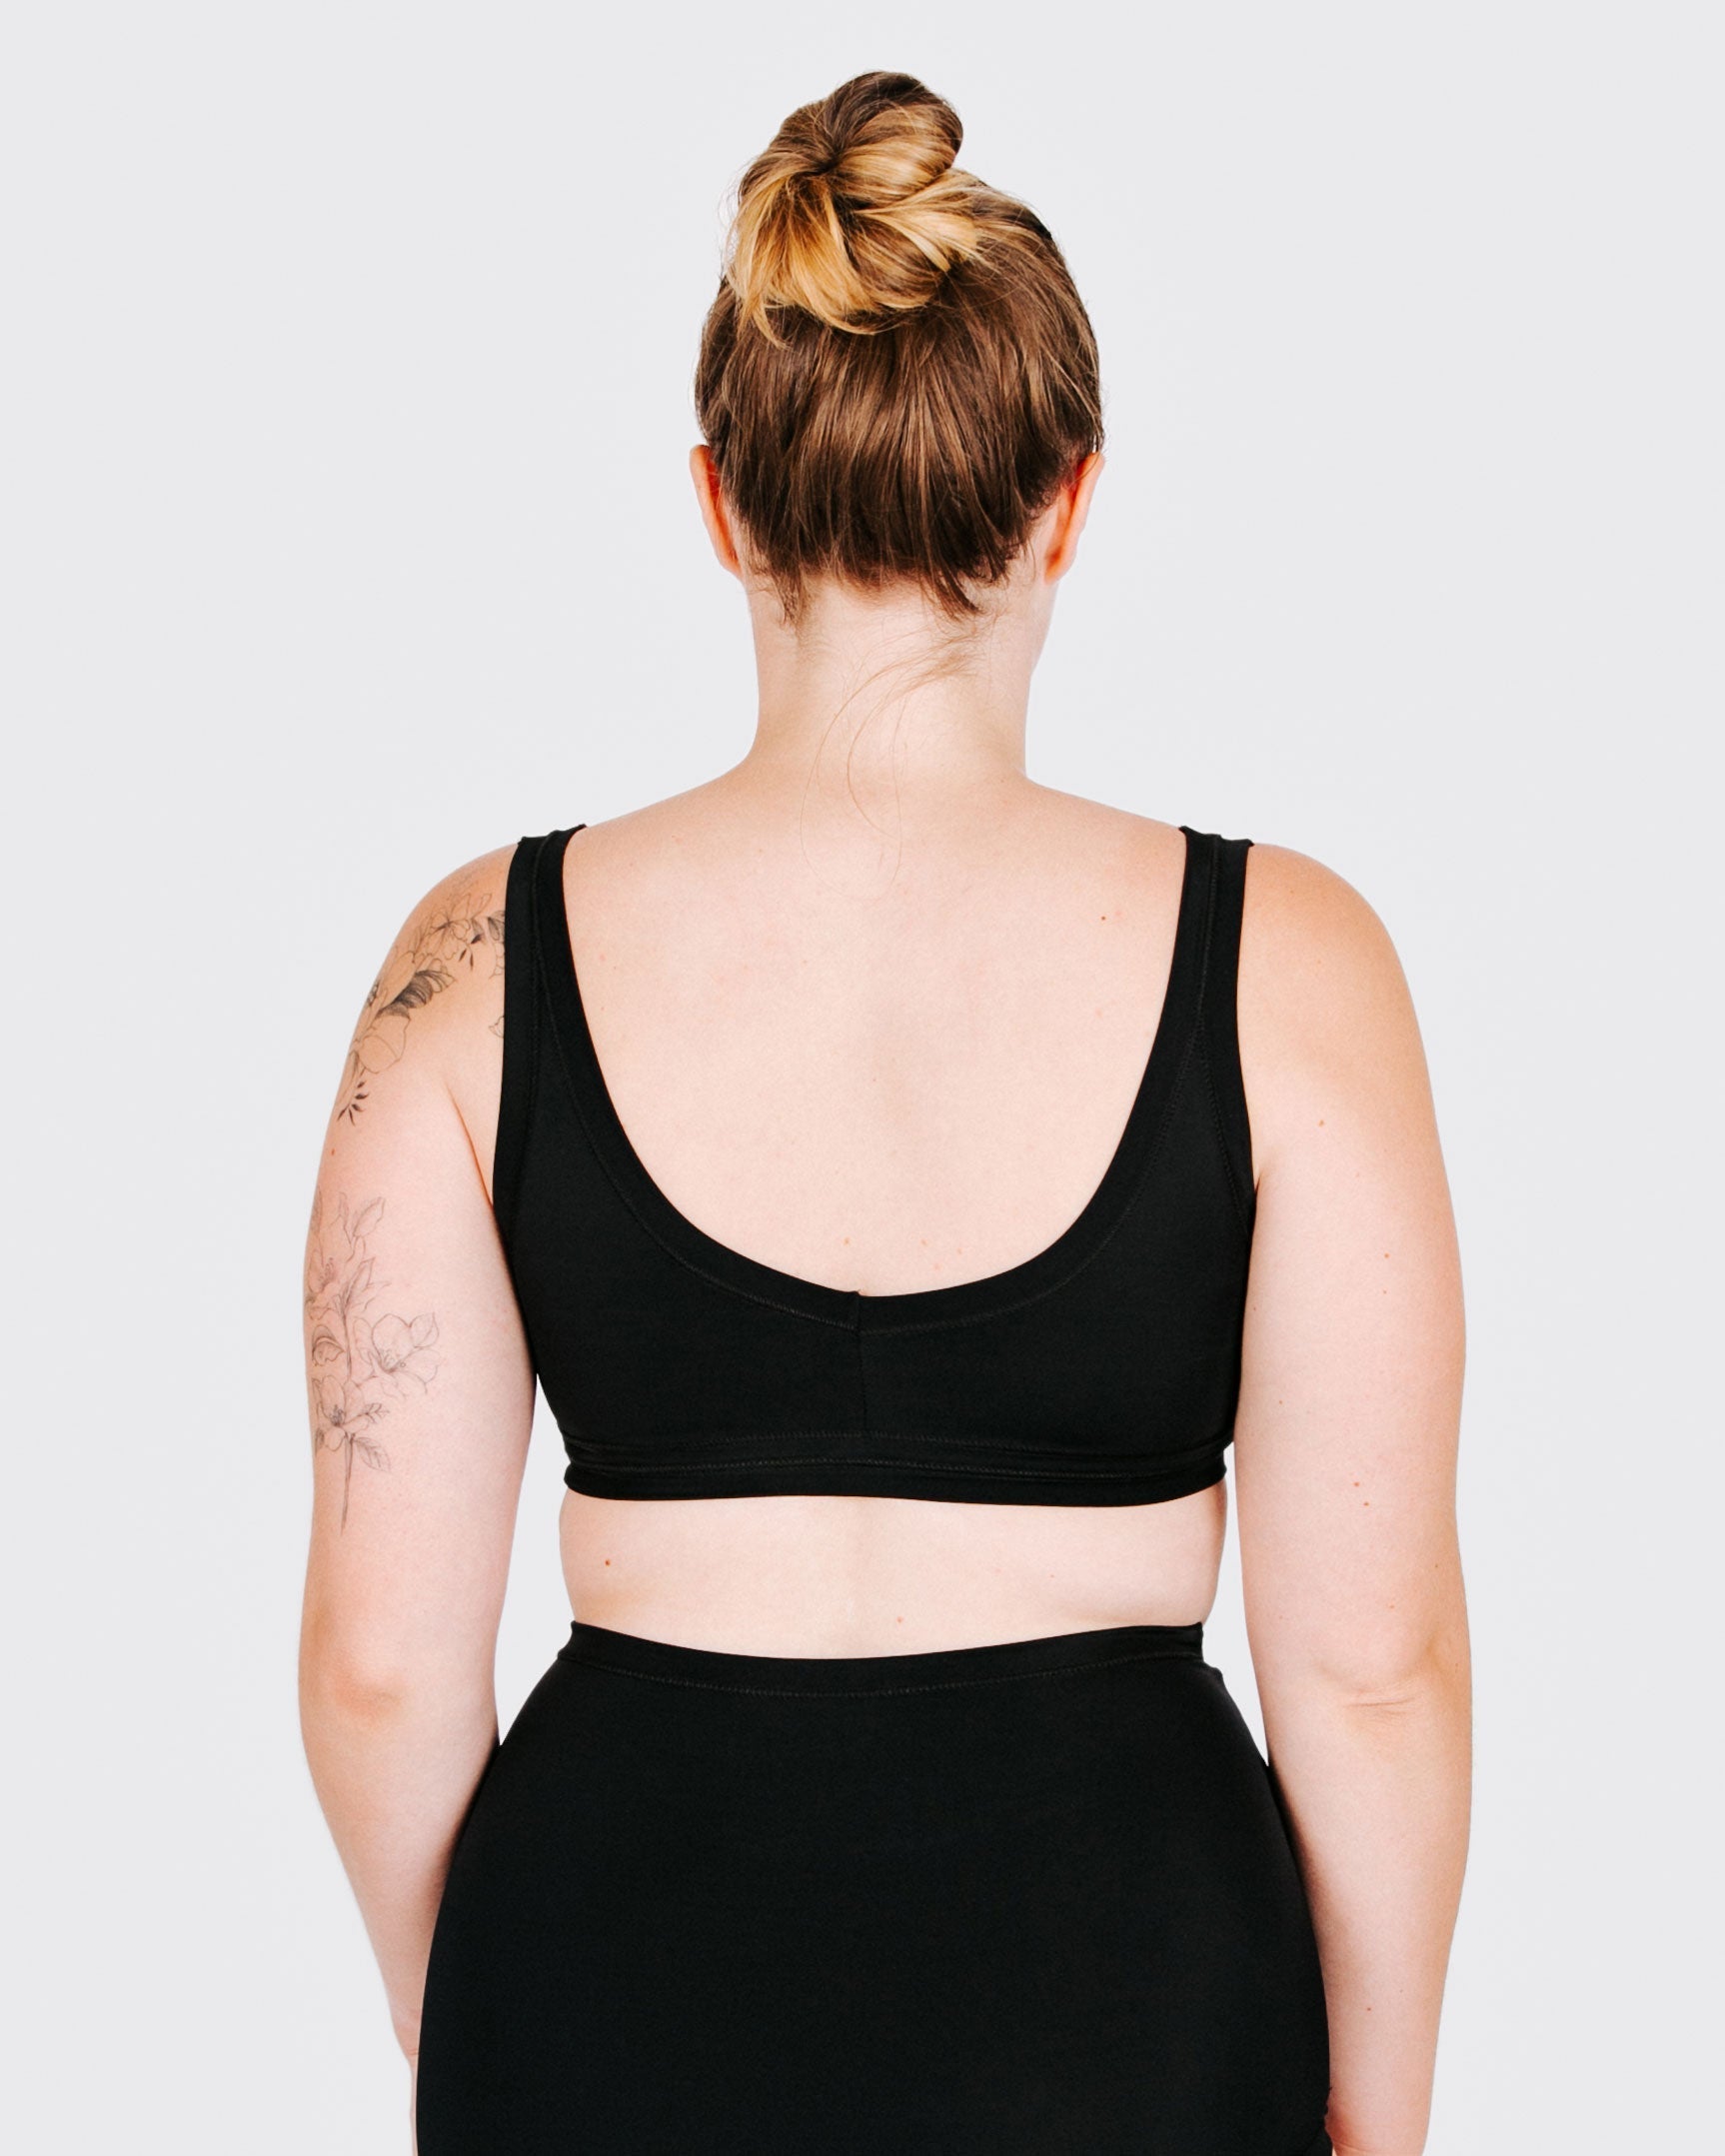 Fit photo from the back of Thunderpants recycled nylon Swimwear Top in Plain Black on a model.